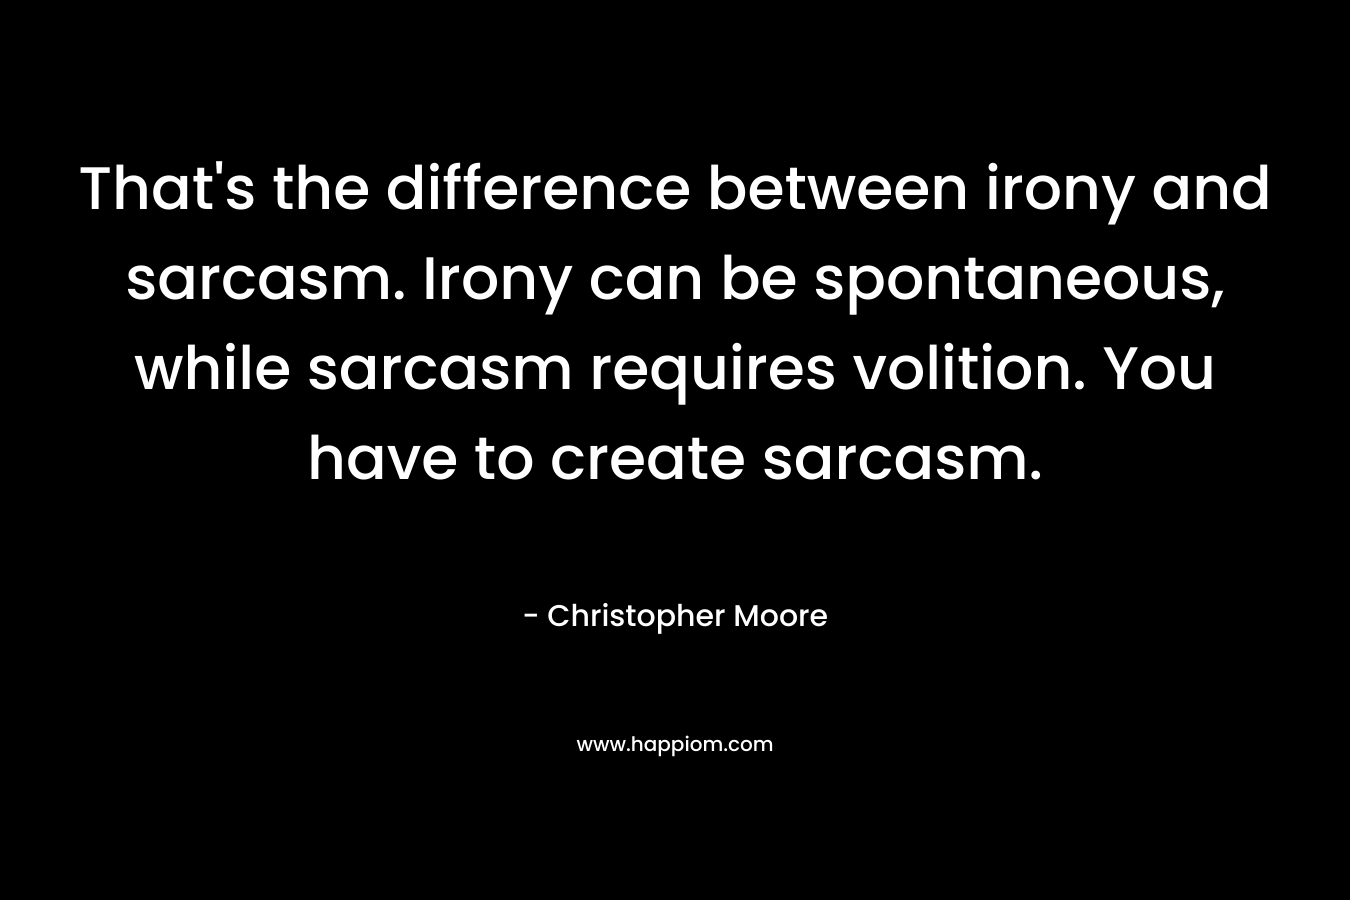 That’s the difference between irony and sarcasm. Irony can be spontaneous, while sarcasm requires volition. You have to create sarcasm. – Christopher Moore